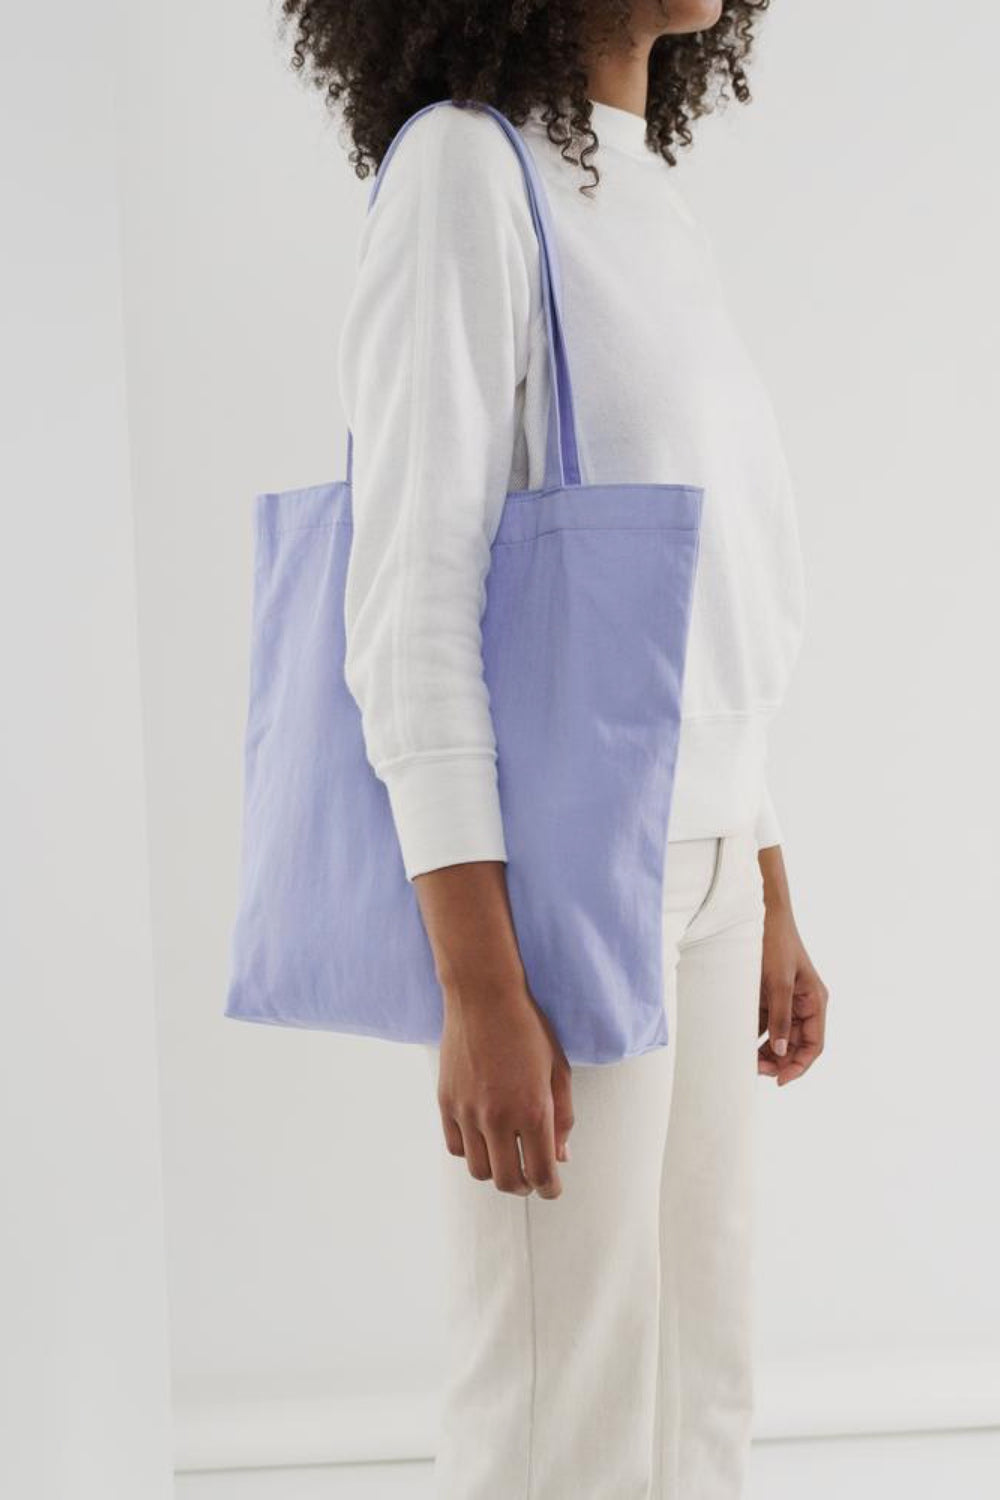 Periwinkle Merch Tote